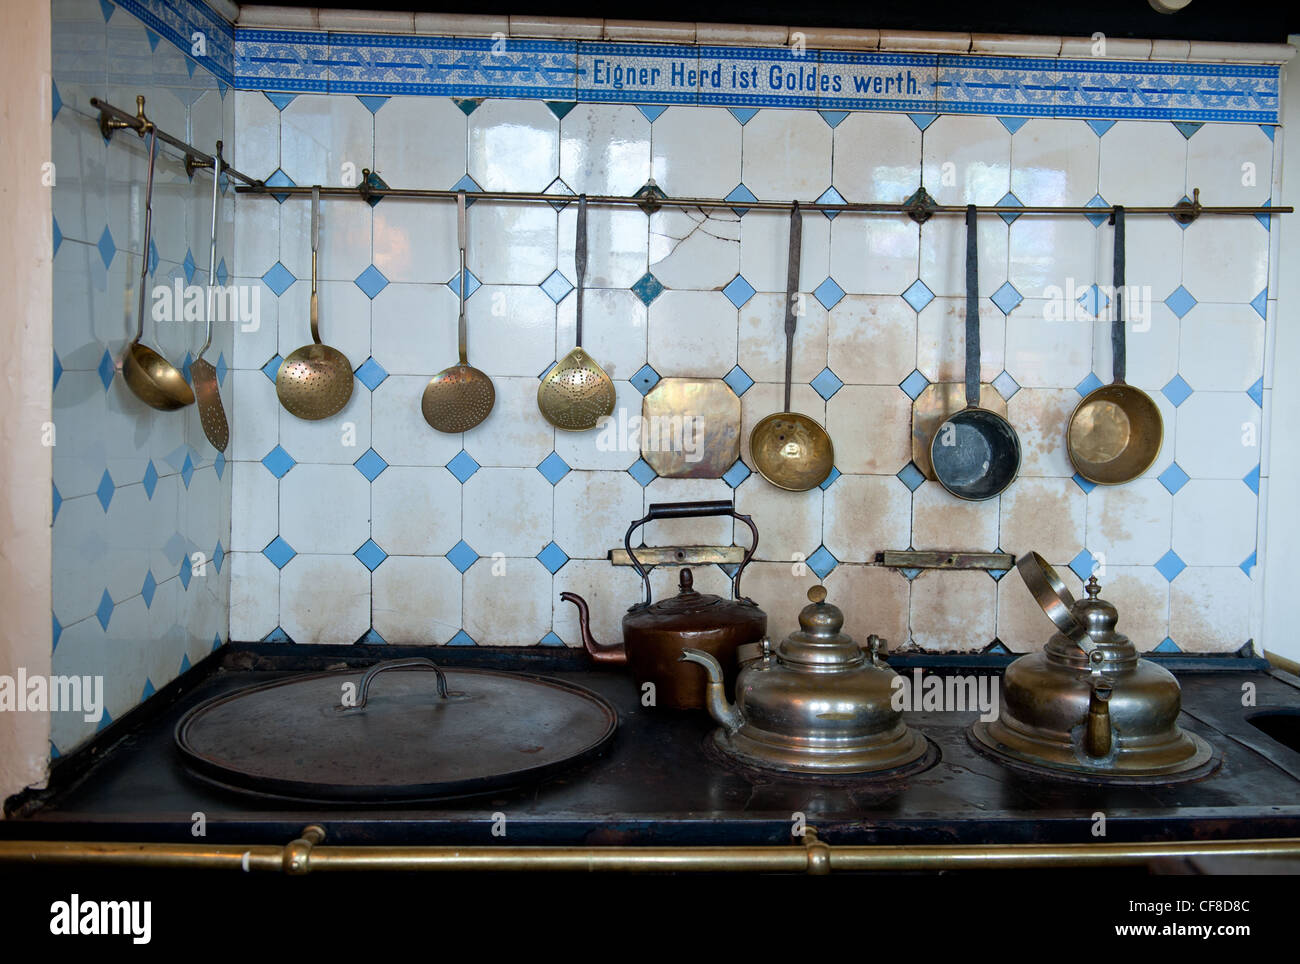 A traditional German kitchen stove used in the 19th century was preserved at the Herbstprinz at Jork, Altes Land, Lower Saxony Stock Photo